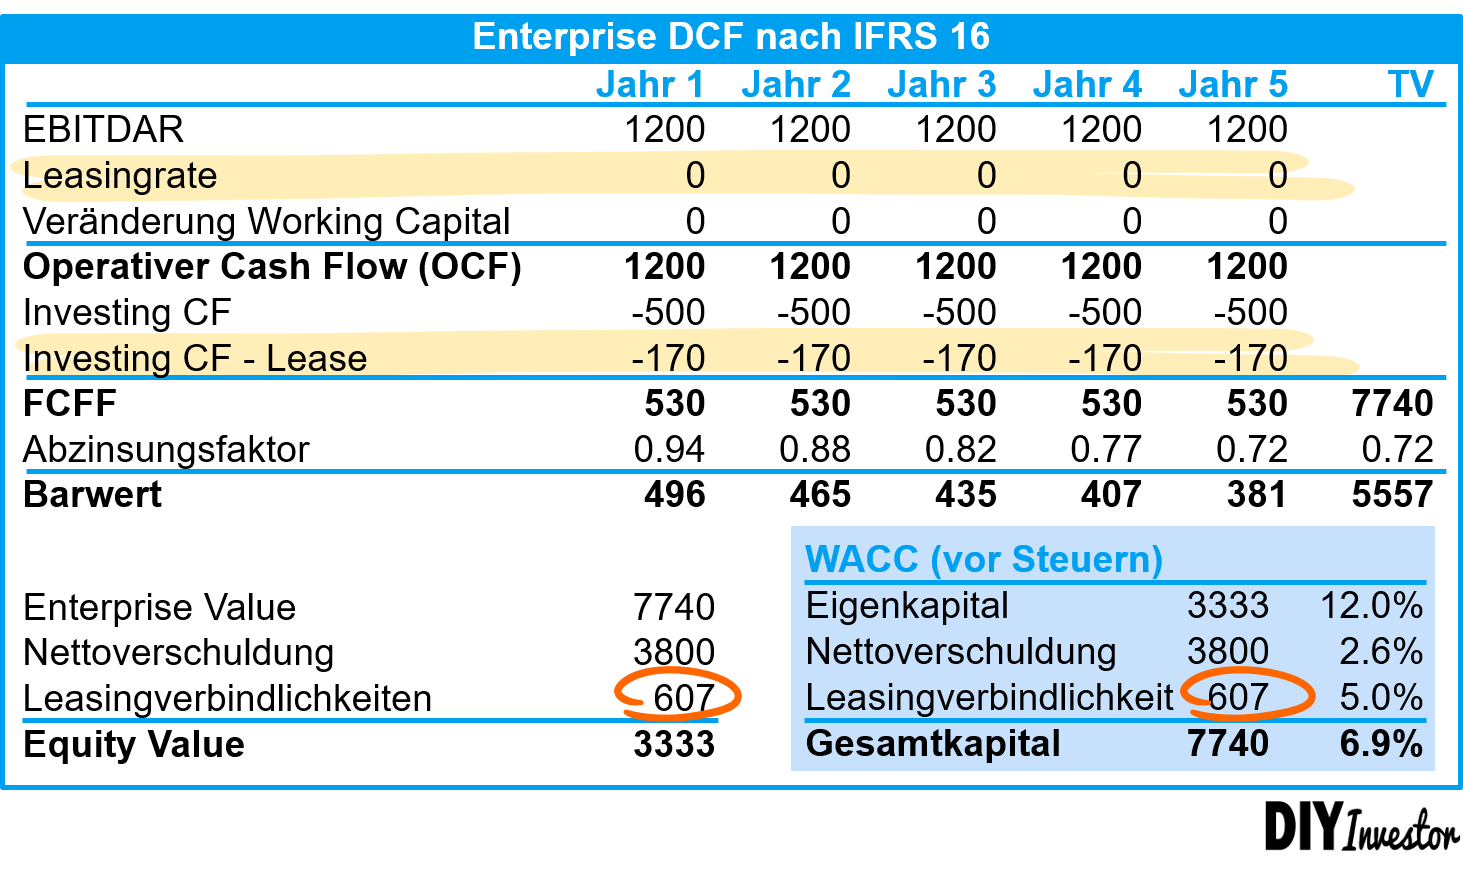 DCF IFRS 16 - Ermittlung Equity Value